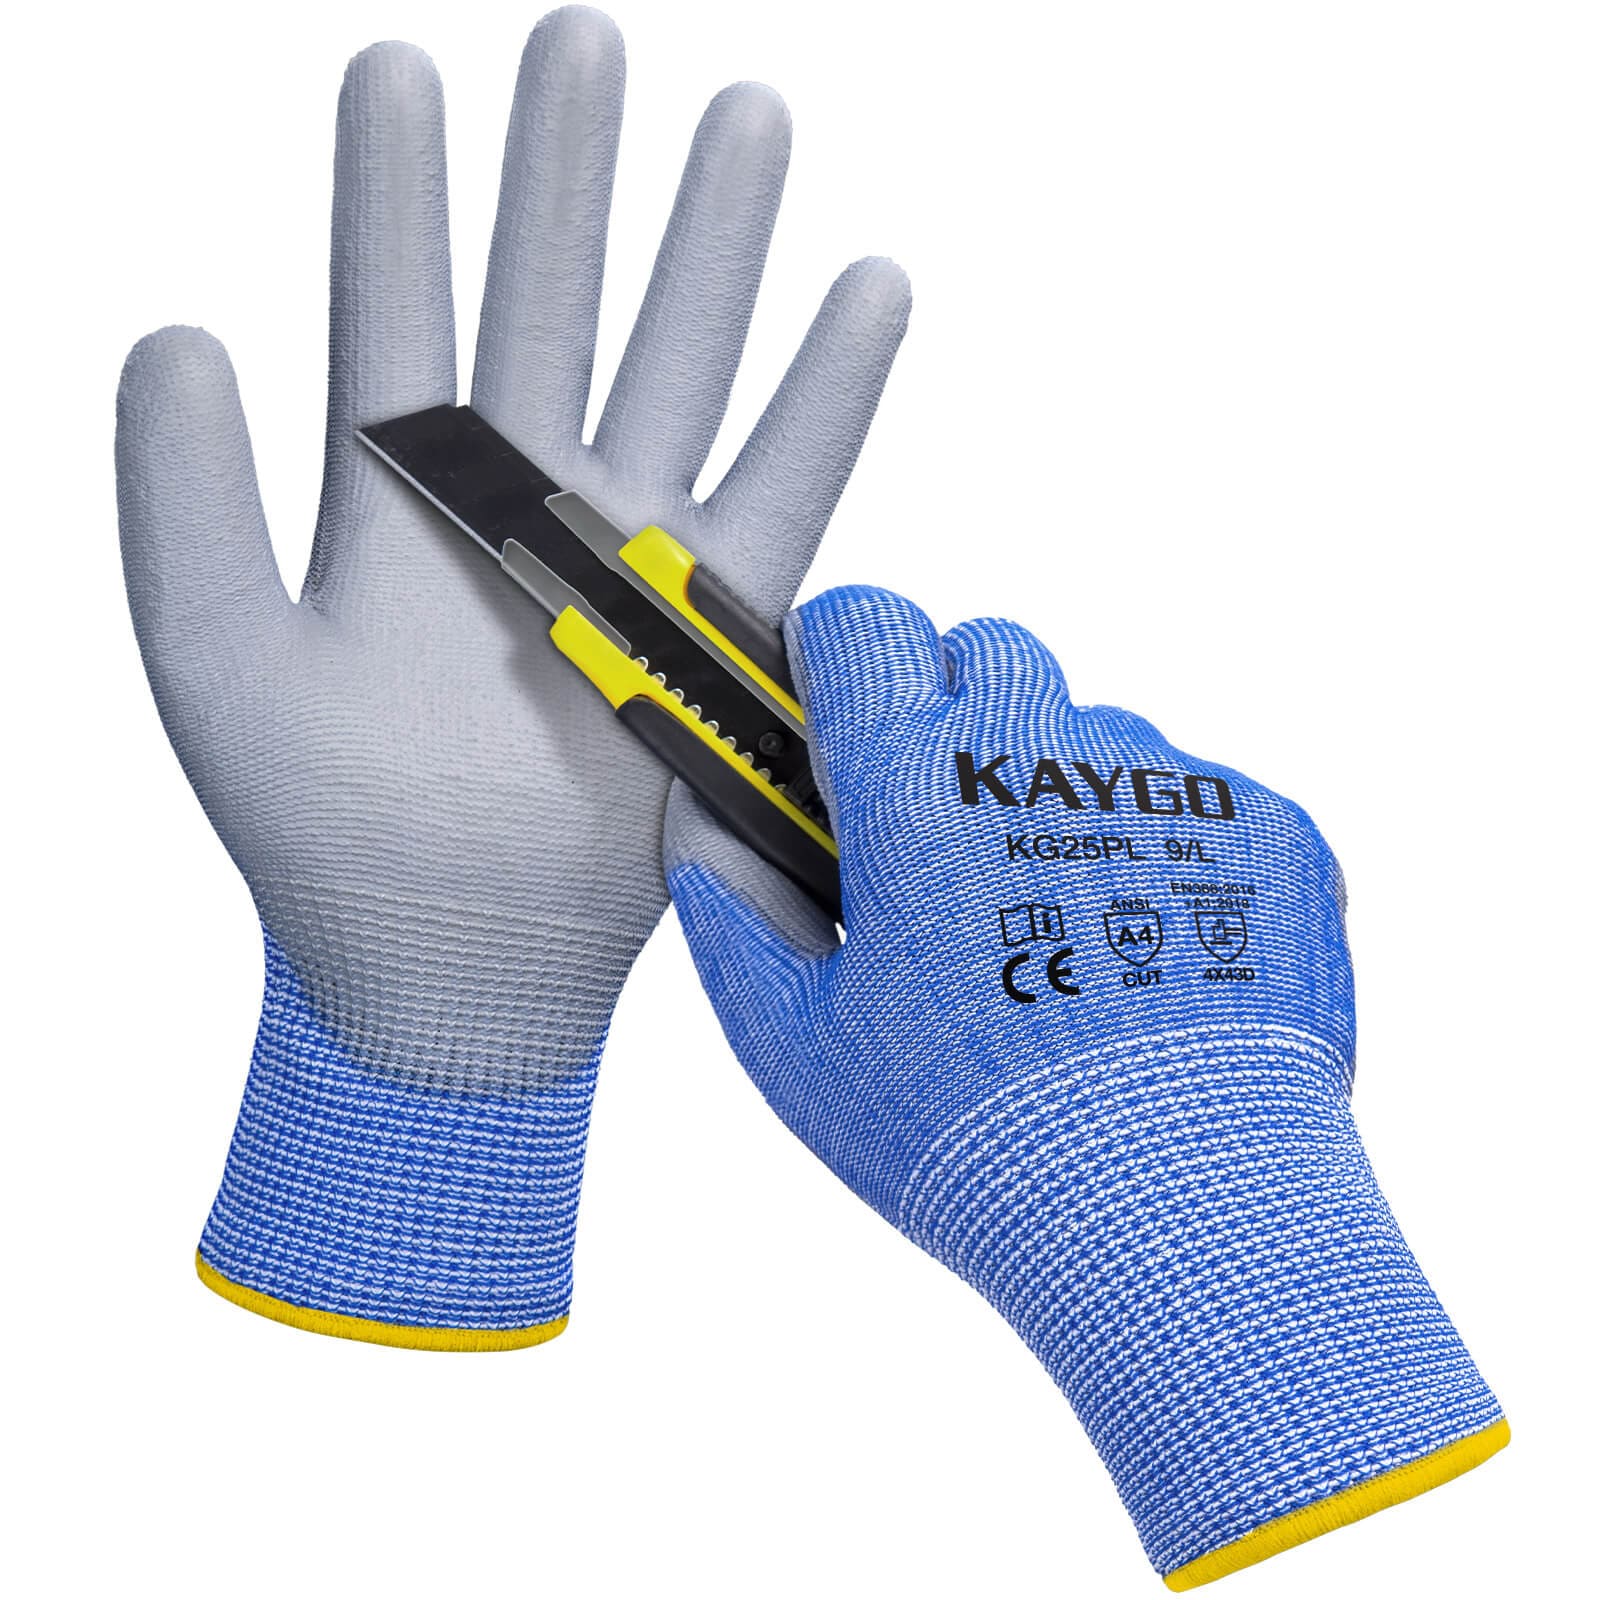 A4 Cut Resistant Gloves with PU Coated Smooth Grip on Palm & Fingers